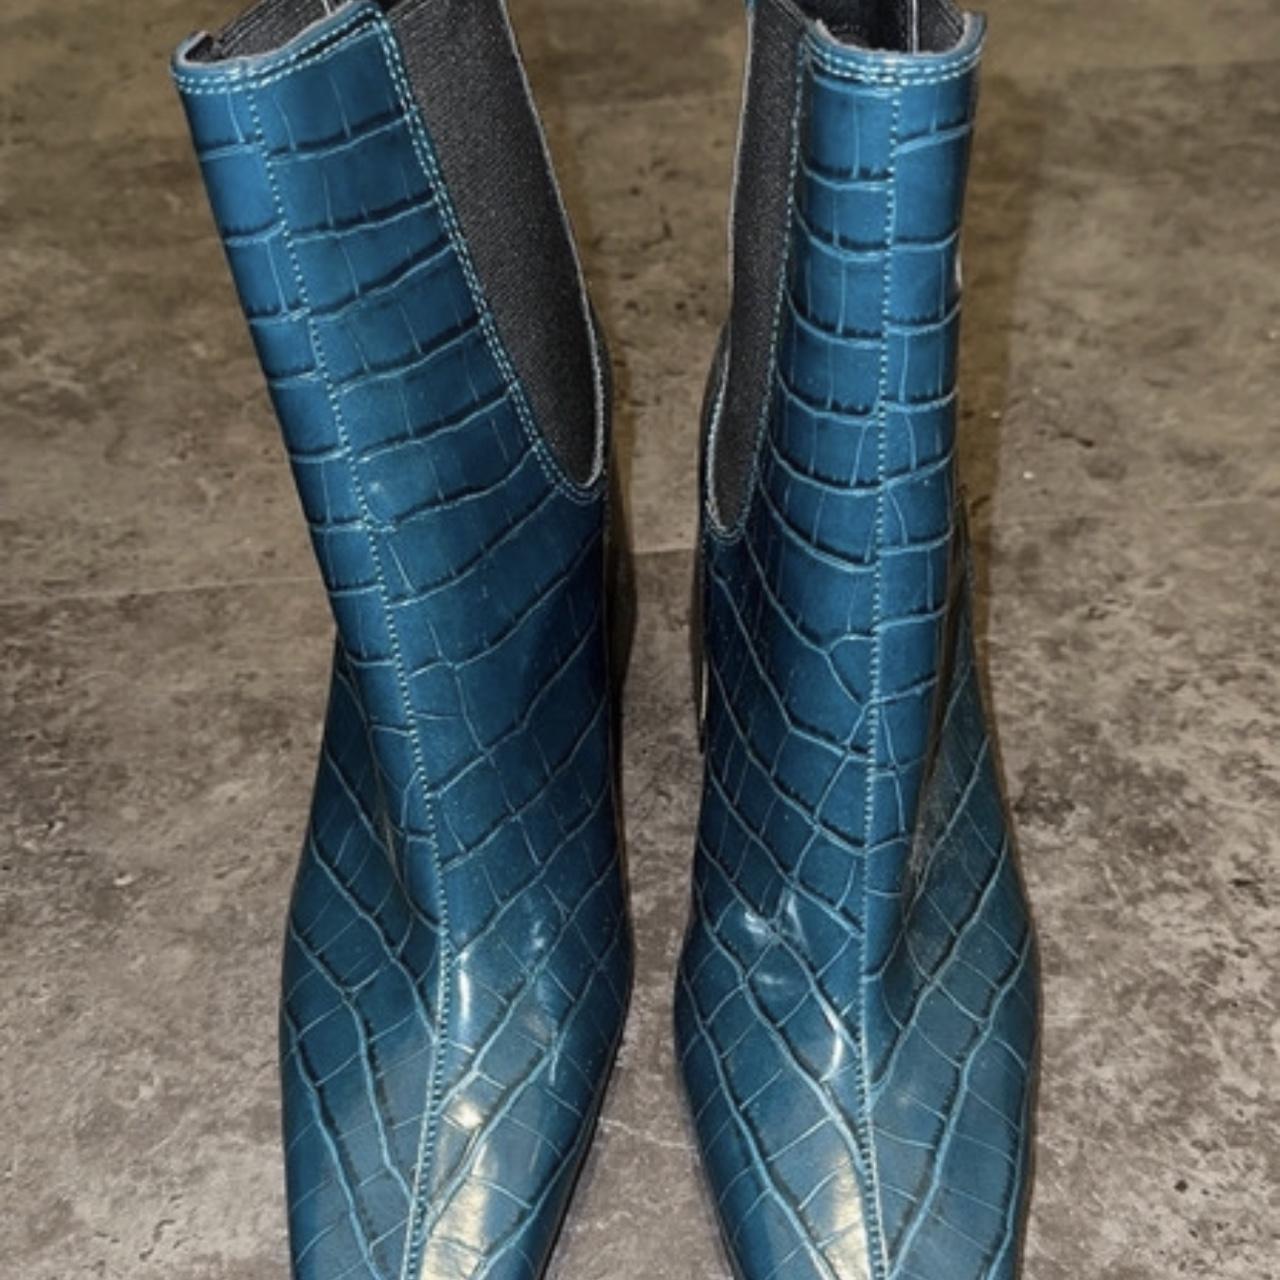 Gorgeous teal croc pattern boots brand new from... - Depop